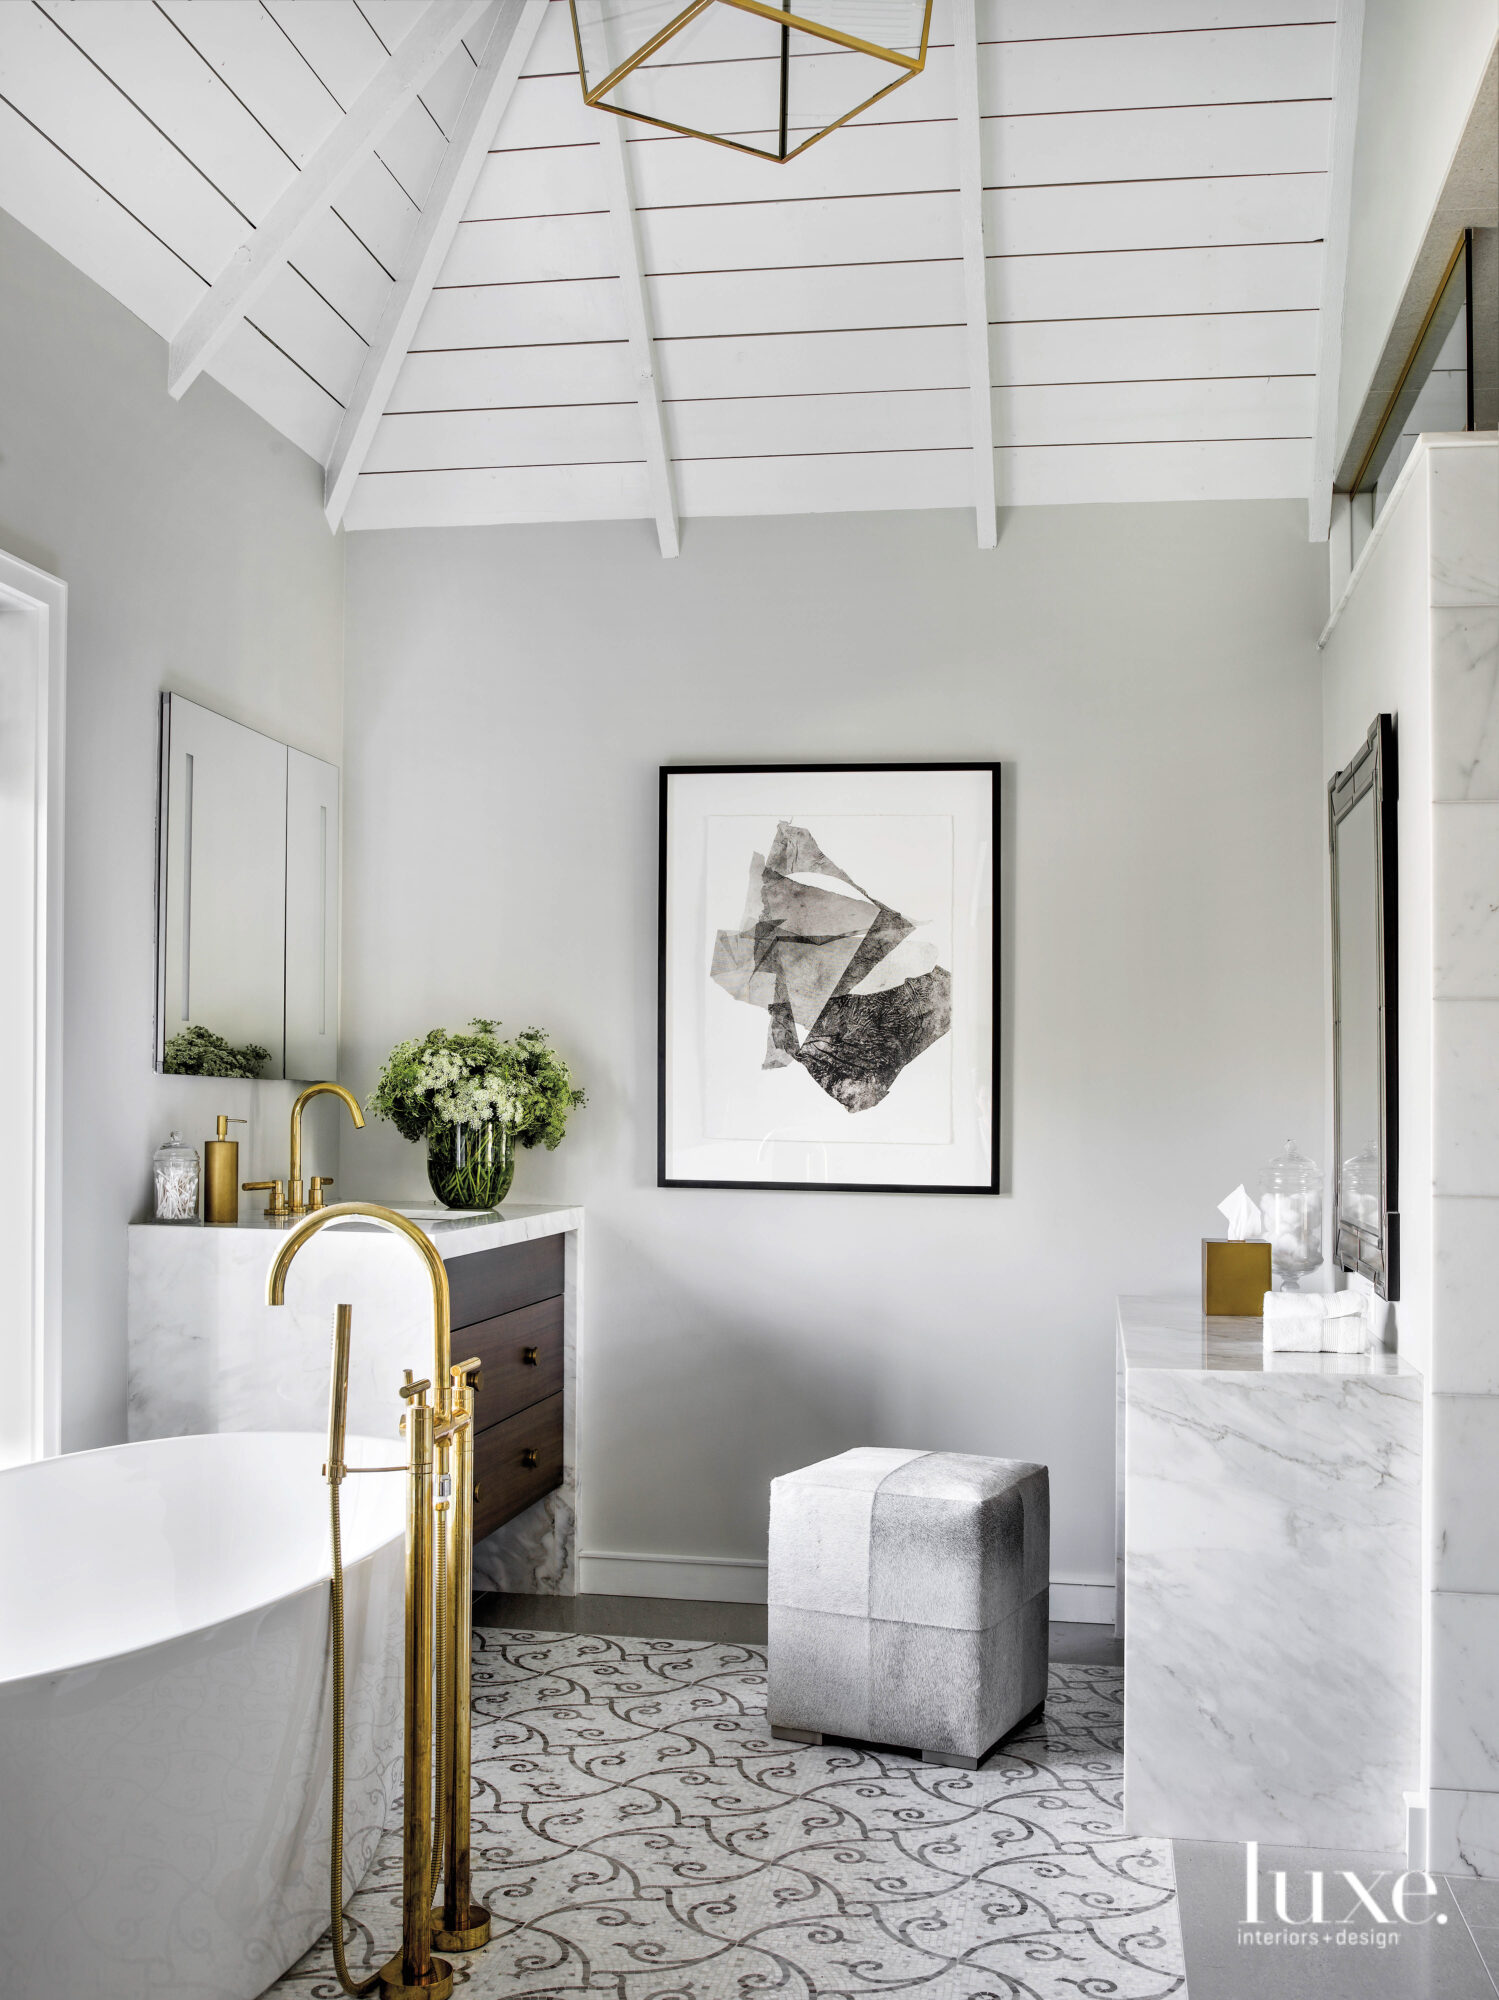 The gray bathroom has a freestanding tub and a shiplap ceiling.